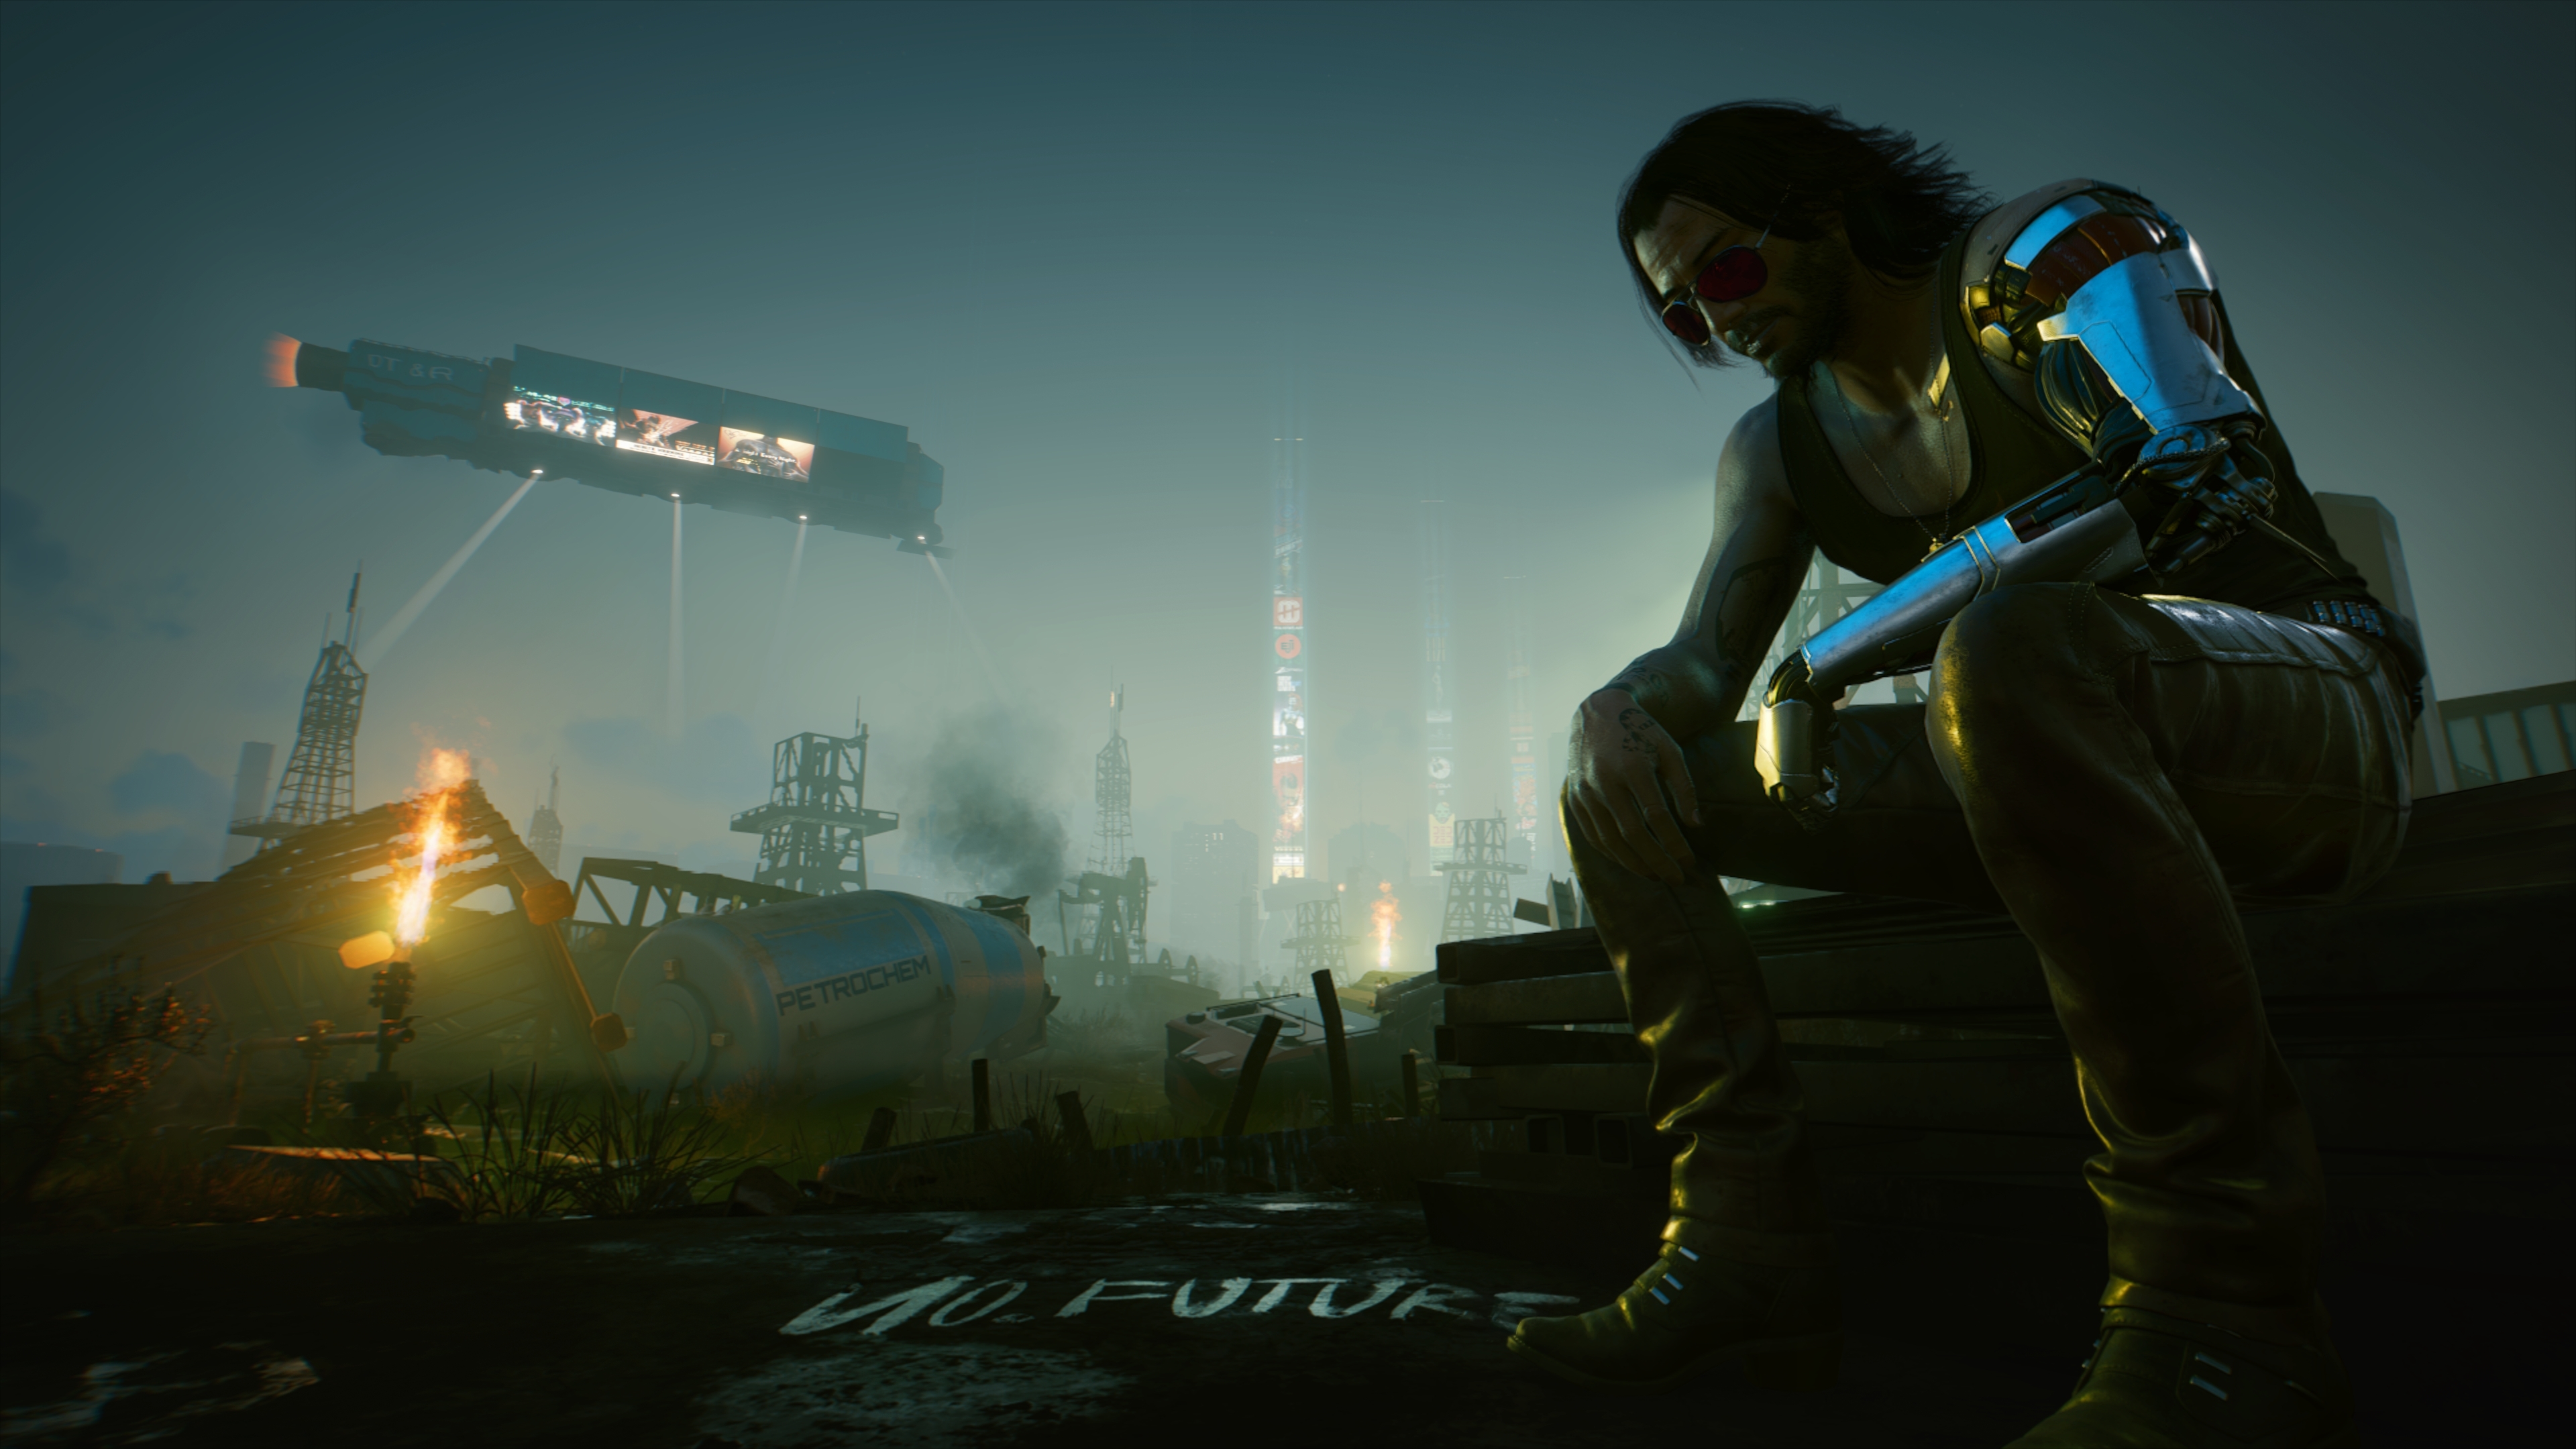 Cyberpunk 2077 Wallpaper for mobile phone, tablet, desktop computer and  other devices HD and 4K wallpapers.